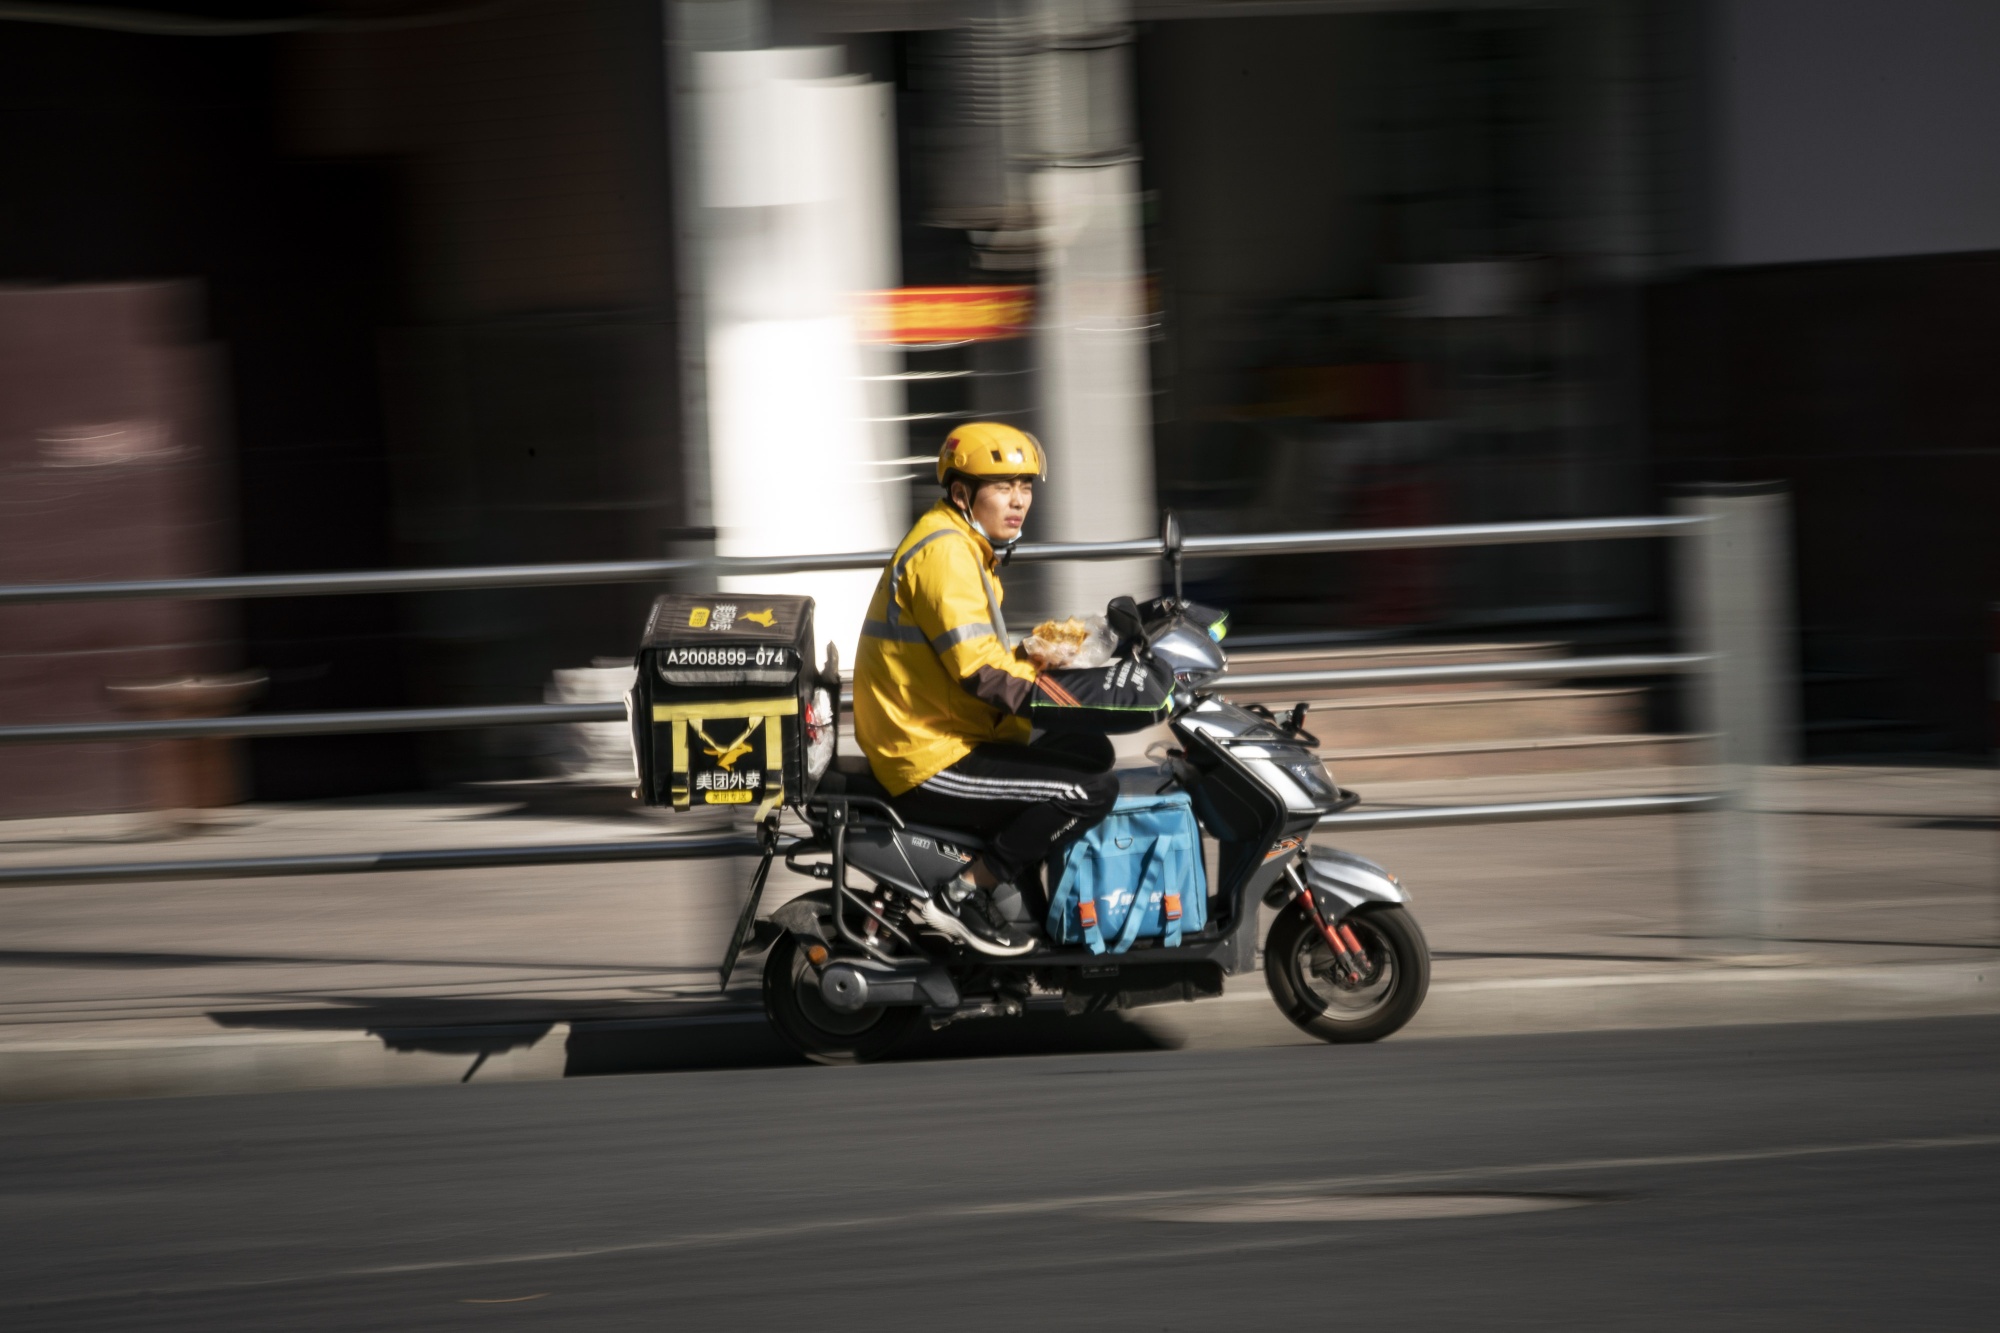 Meituan Dianping Delivery Drivers As Company Reports Earnings